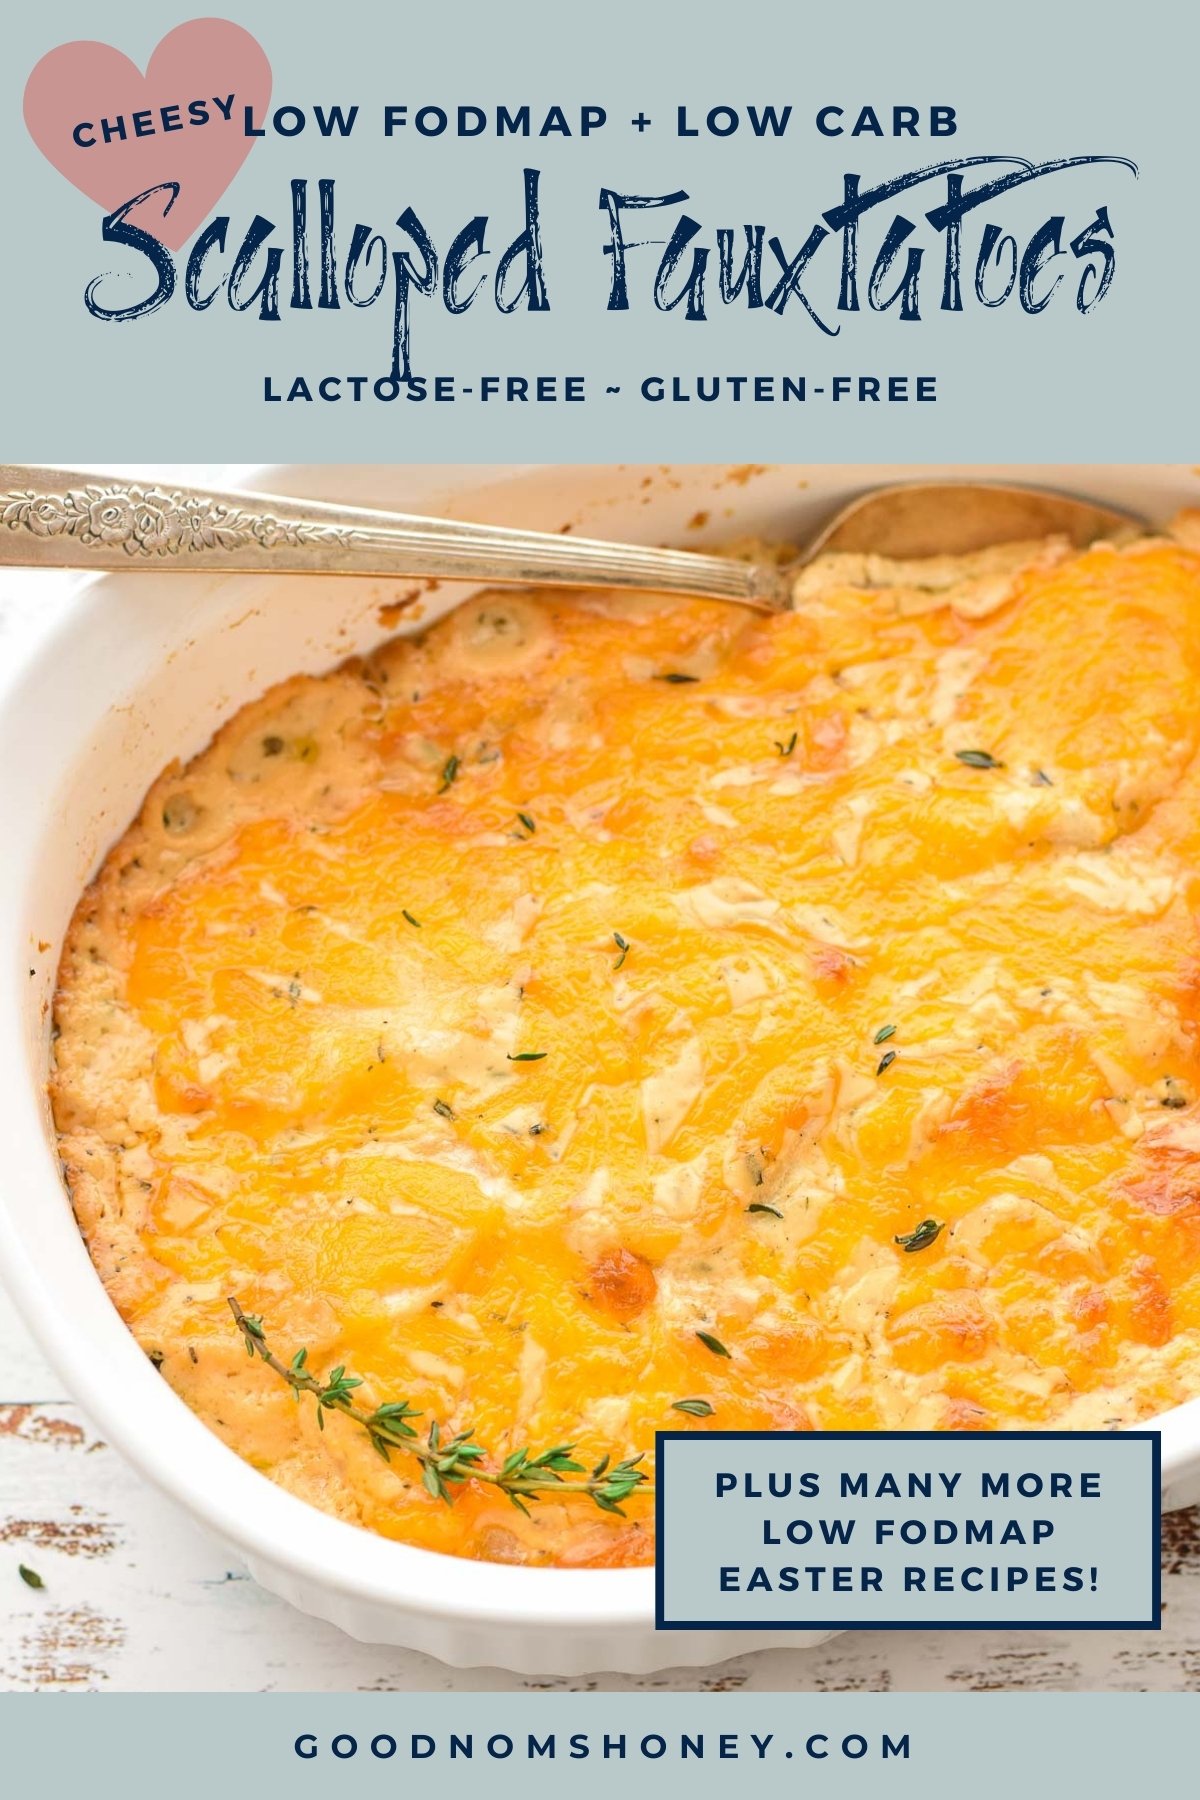 pinterest image with cheesy low fodmap + low carb scalloped fauxtatoes lactose-free gluten-free at the top and plus many more low fodmap easter recipes and goodnomshoney.com at the bottom